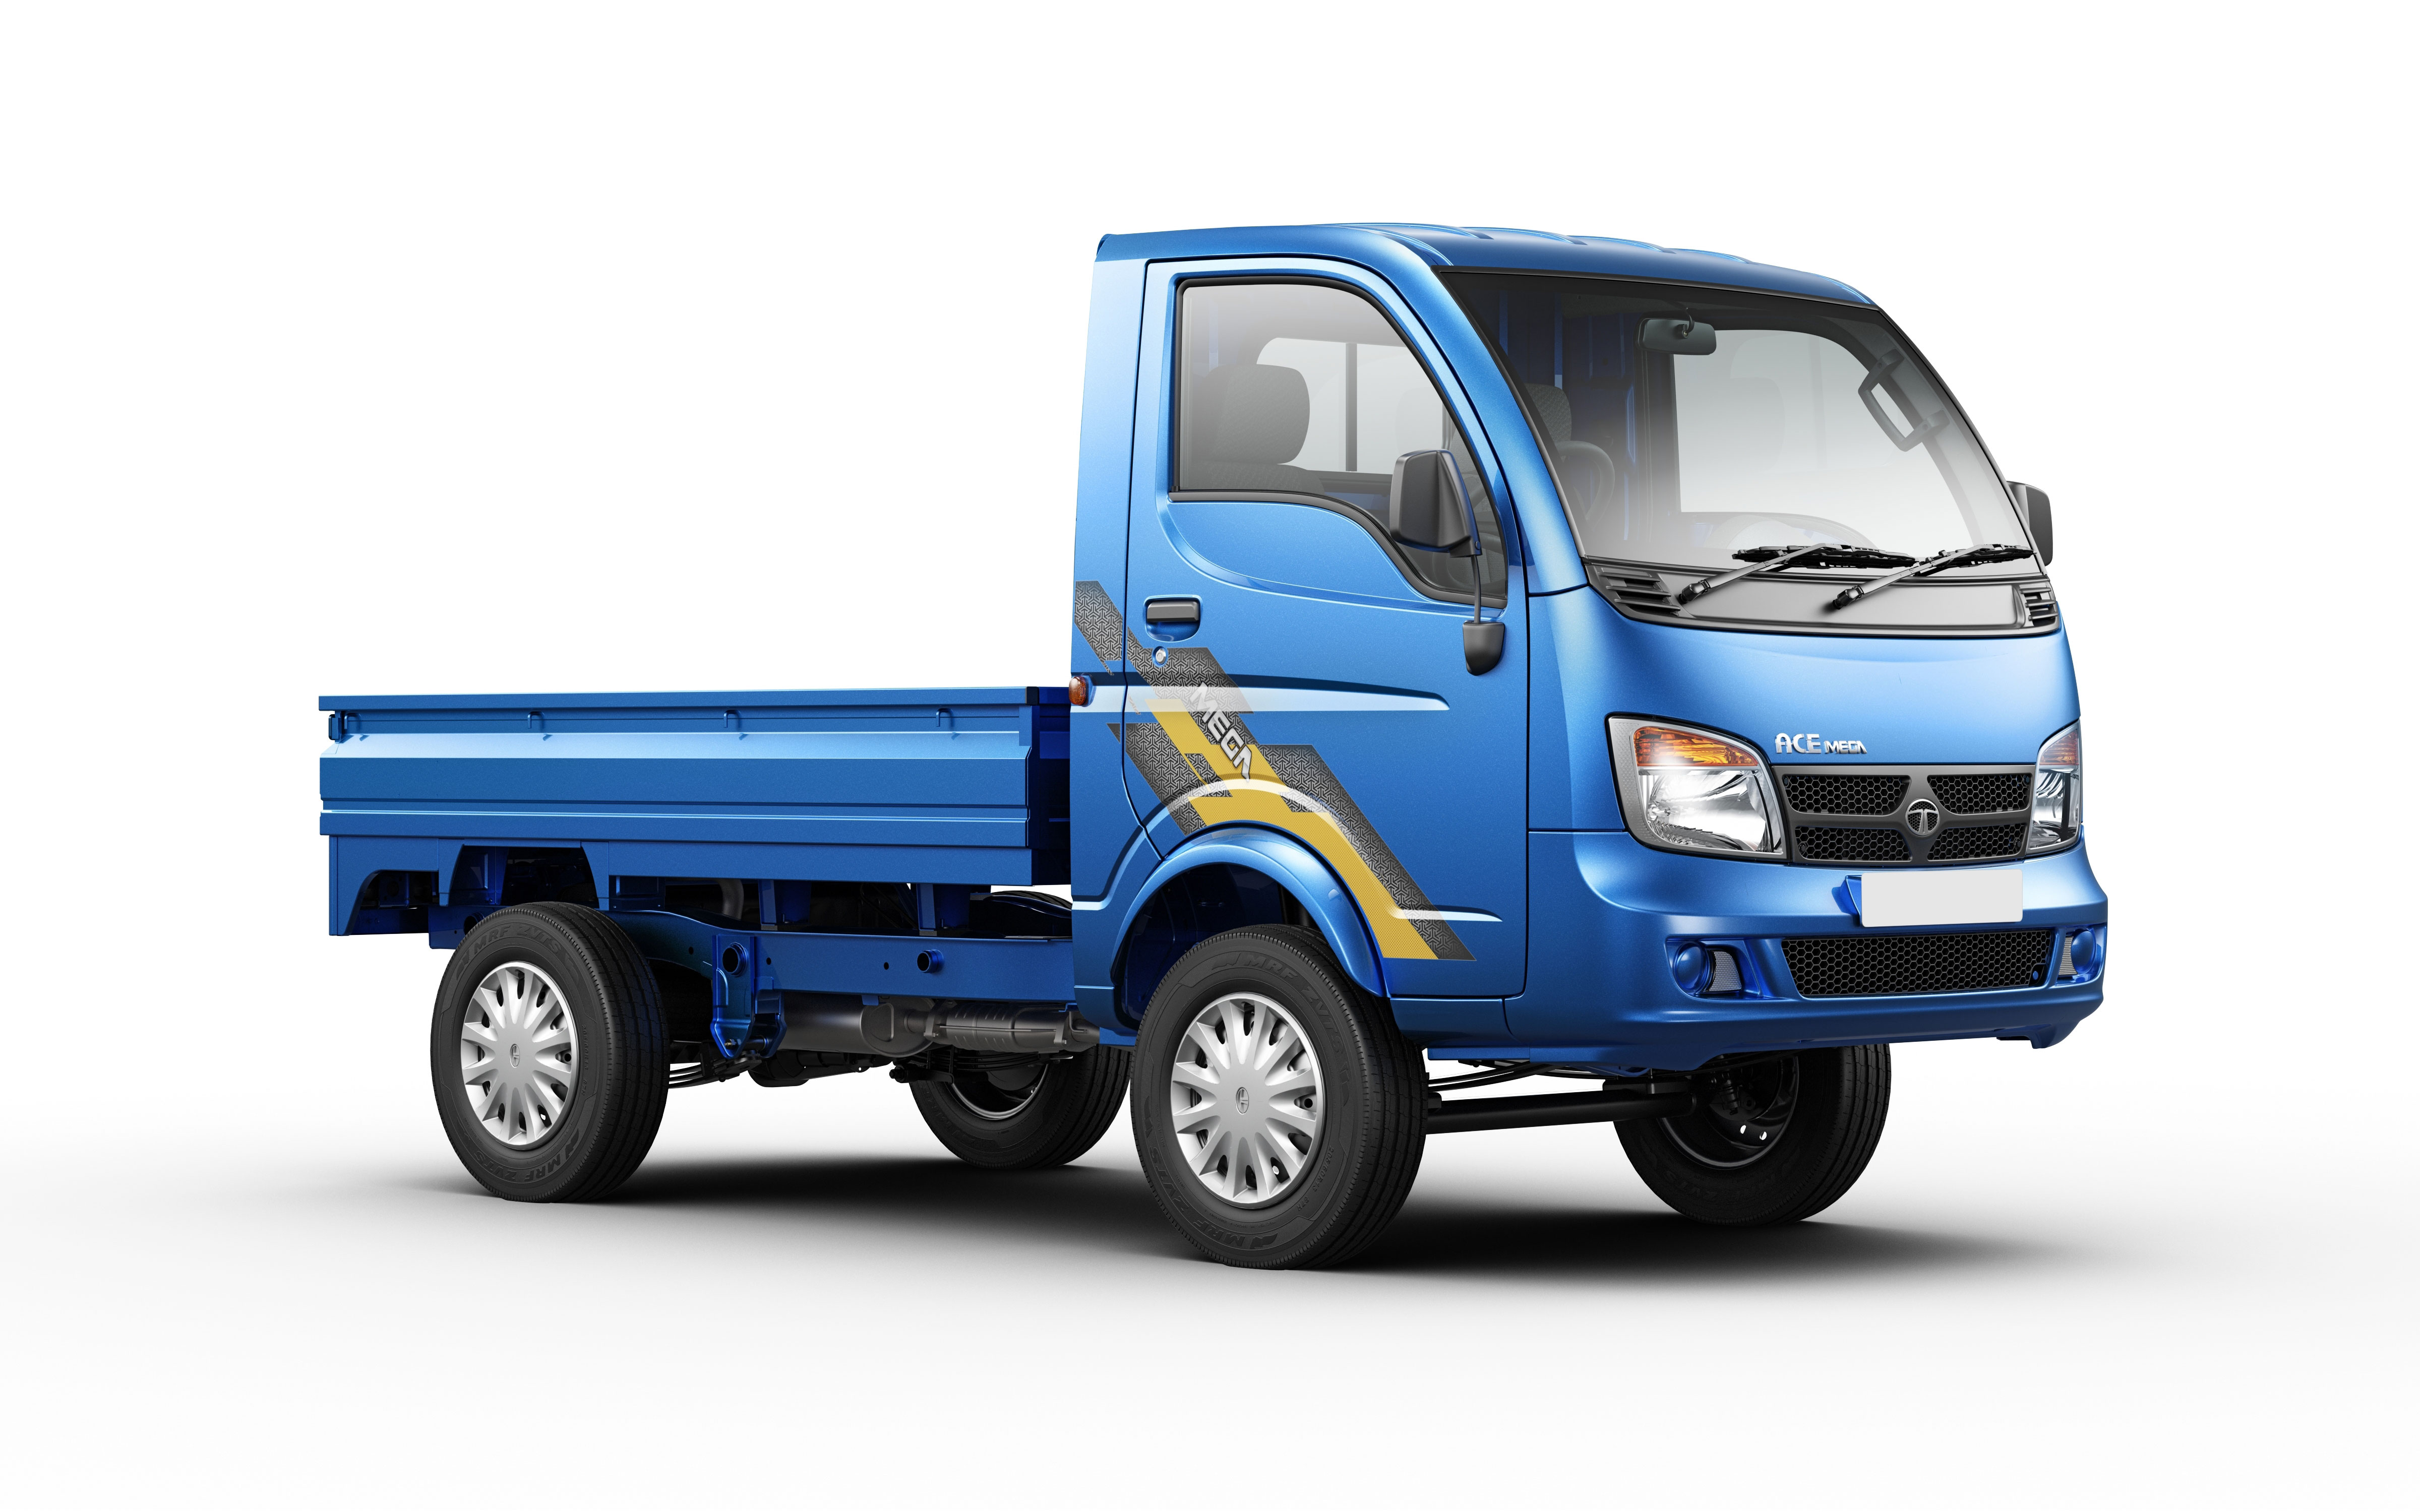  Tata  Ace Mega launched to slot between Ace HT and Super Ace